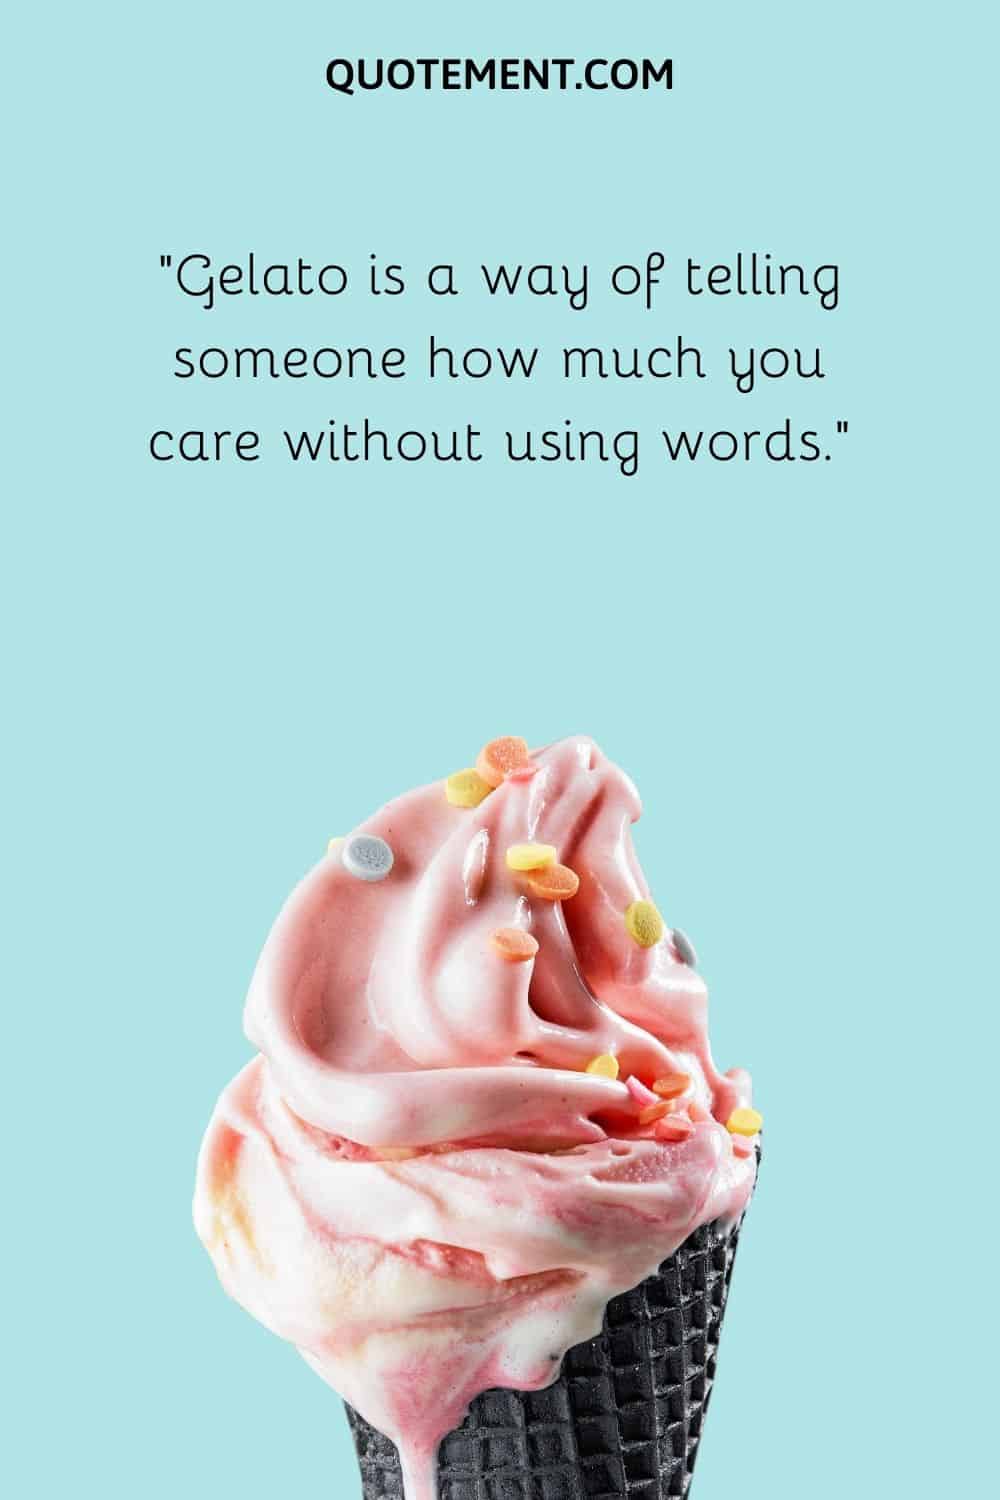 Gelato is a way of telling someone how much you care